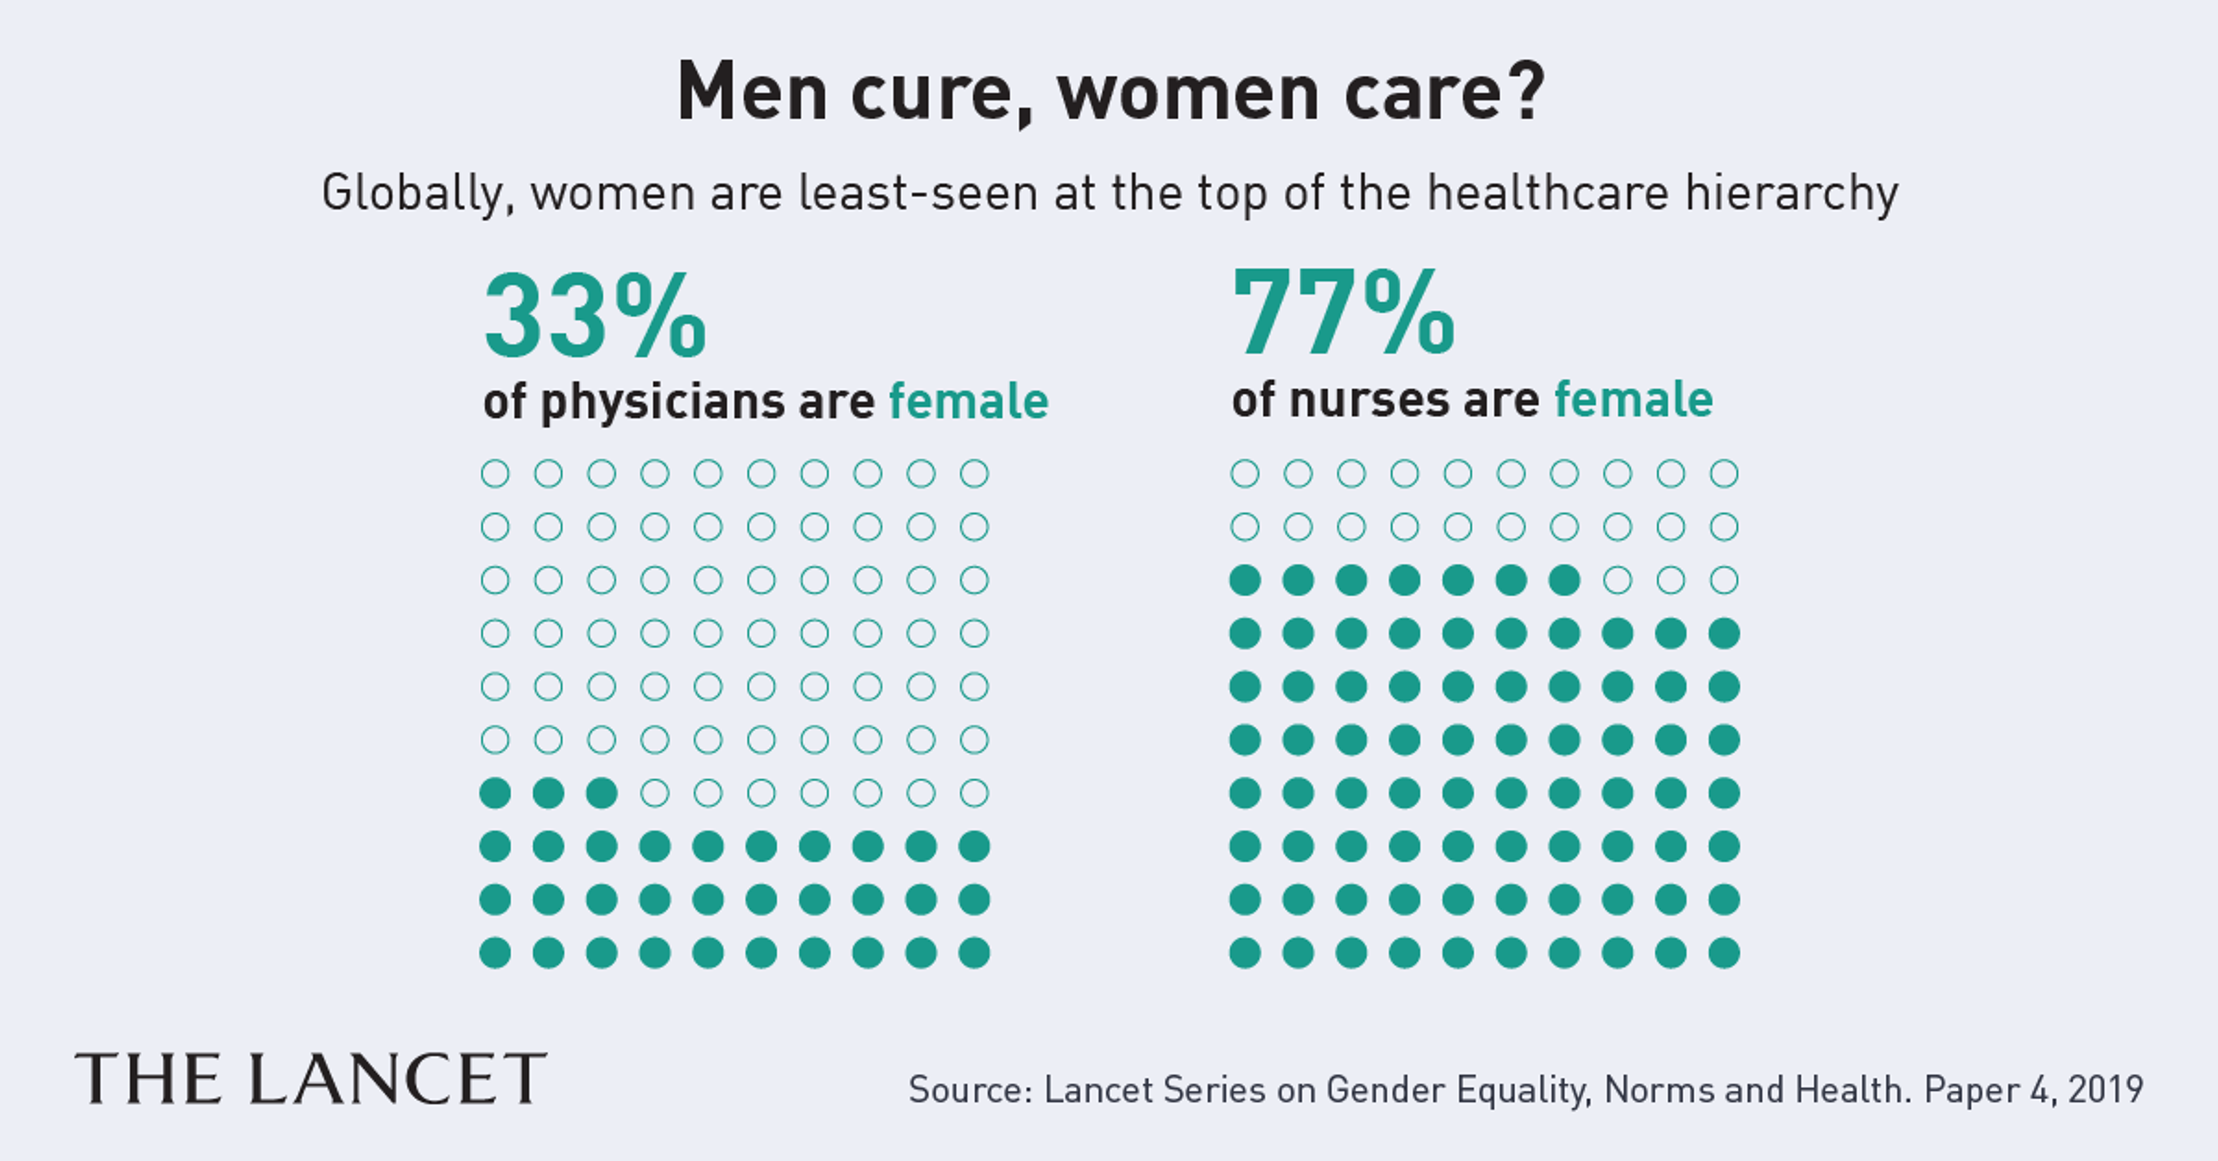 A graphic based on research from the Lancet. It's titled 'Men cure, women care?' It reveals that globally women are least-seen at the top of the healthcare hierarchy. There are two plots of 100 dots each. On the first, 33 are shaded in with the title '33% of physicians are female'. The other grid of 100 dots has 77 filled in and is titled 77% of nurses are female.